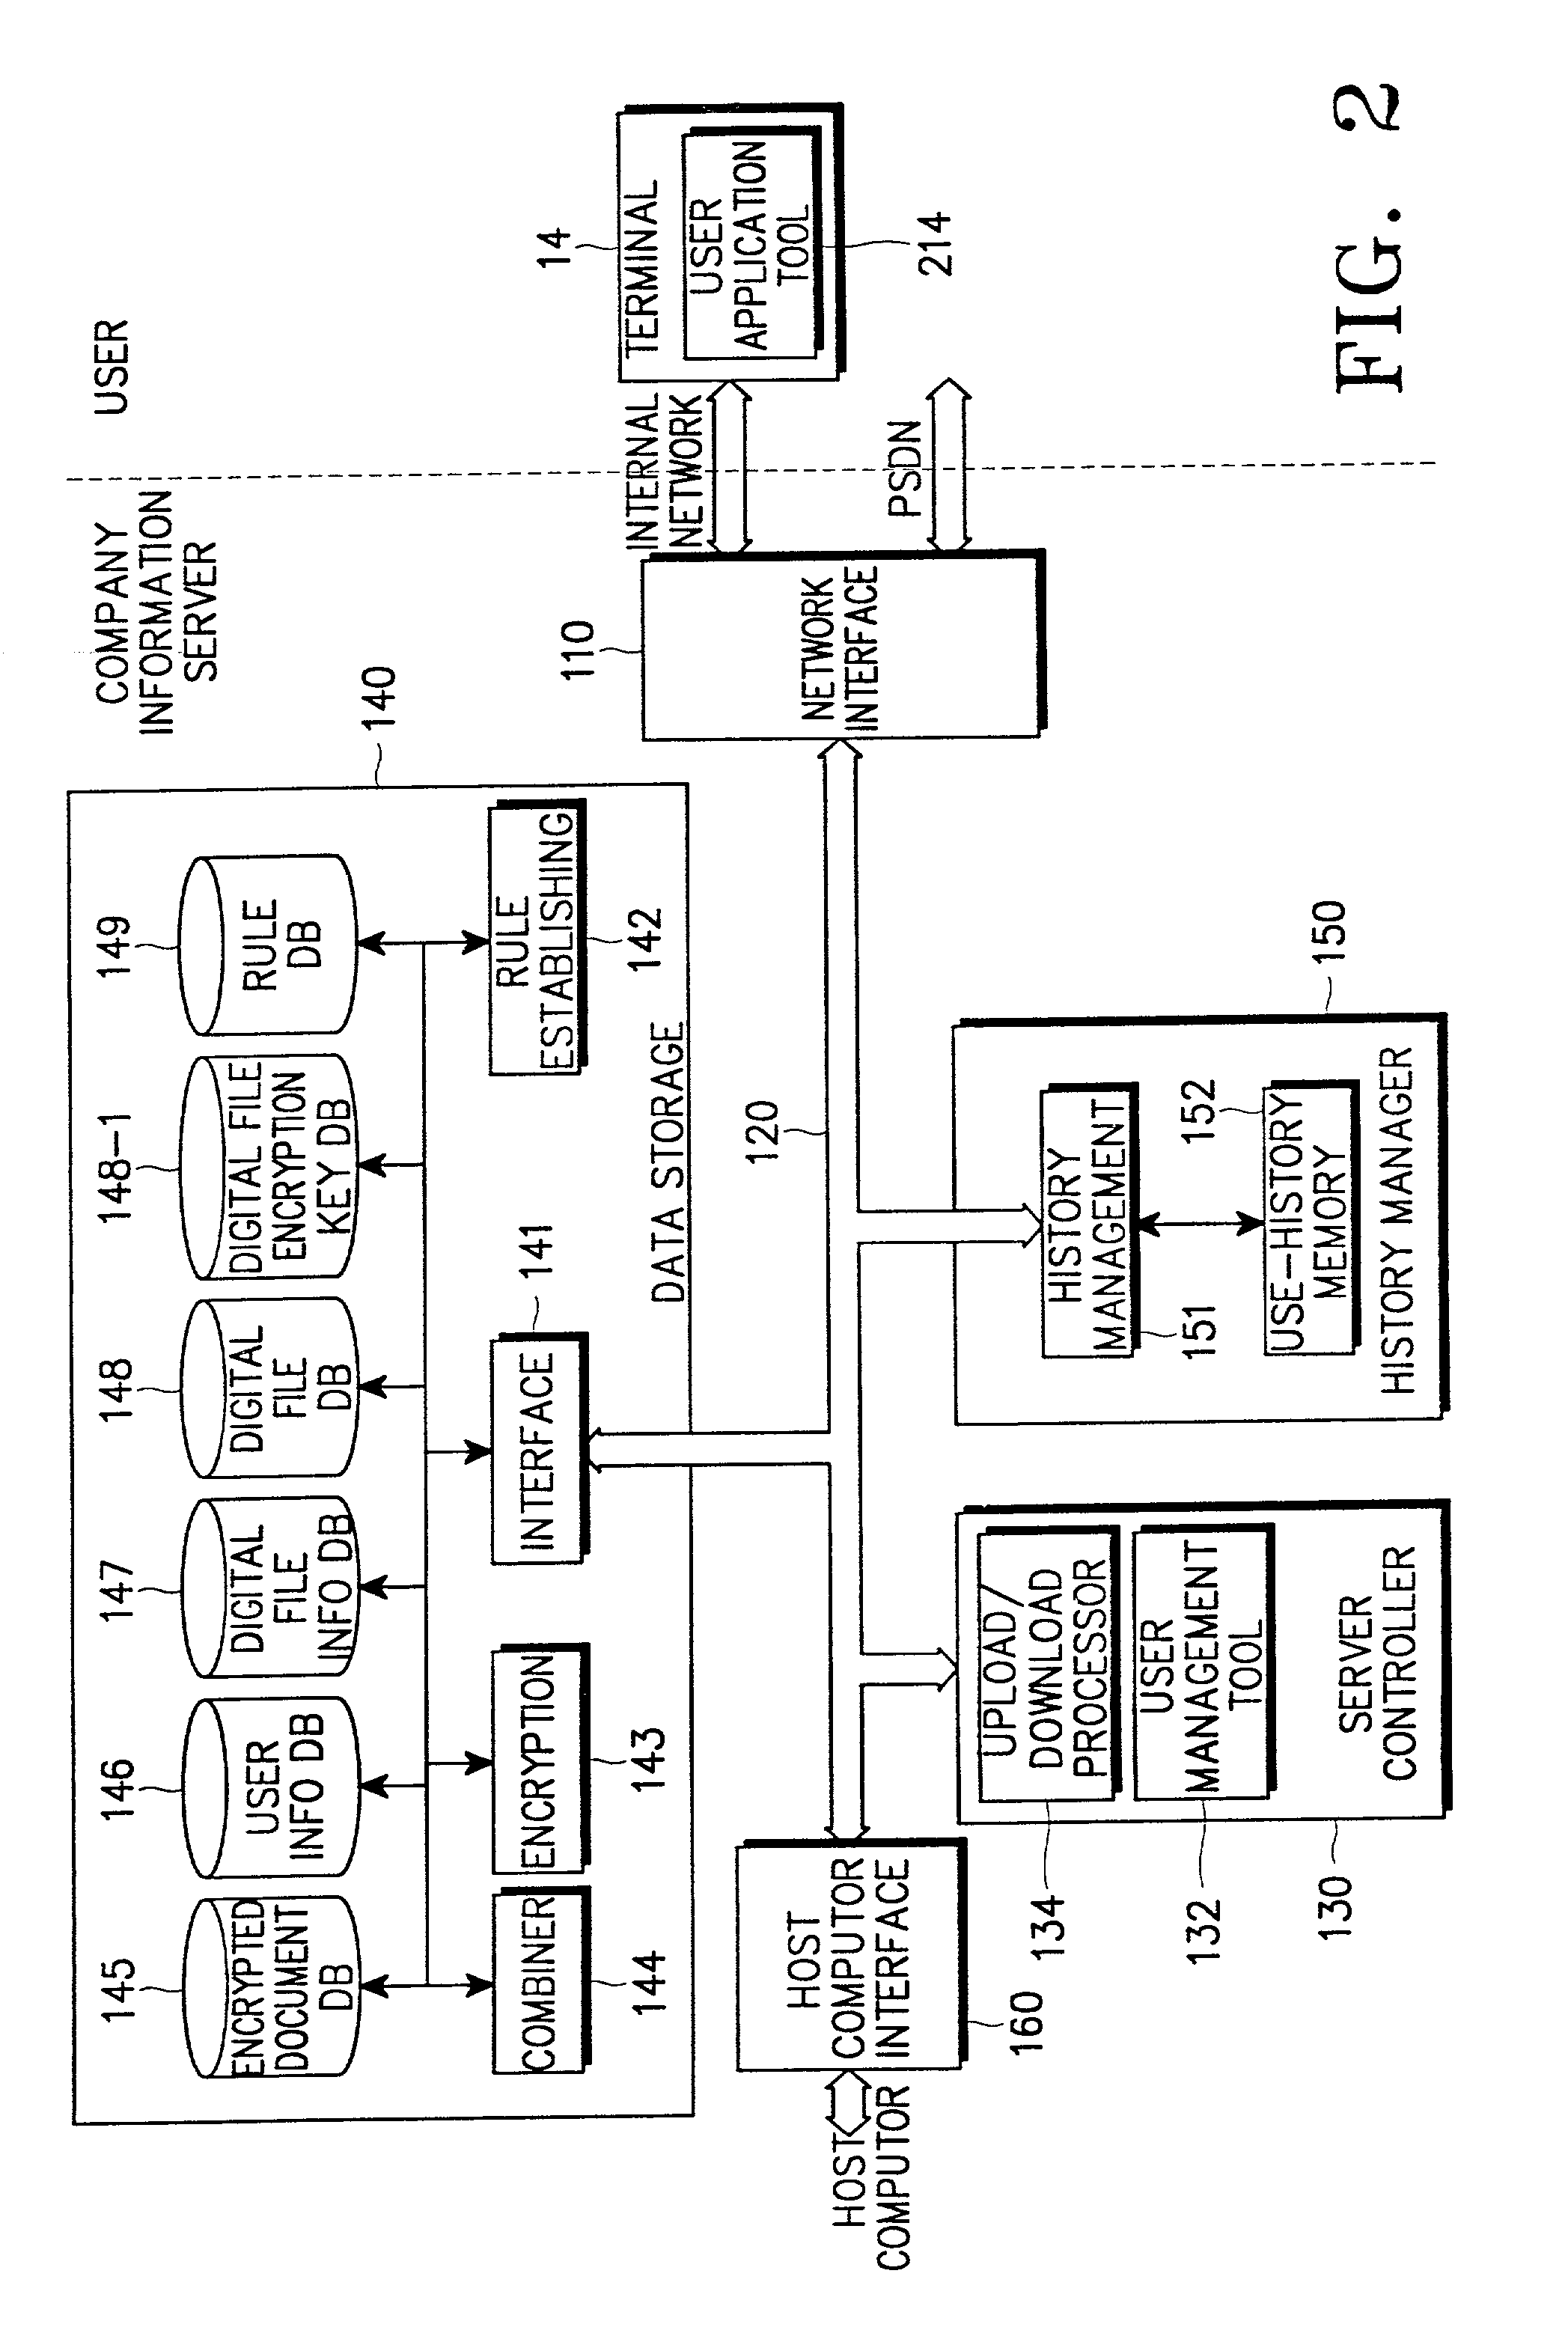 Method for securing digital information and system therefor